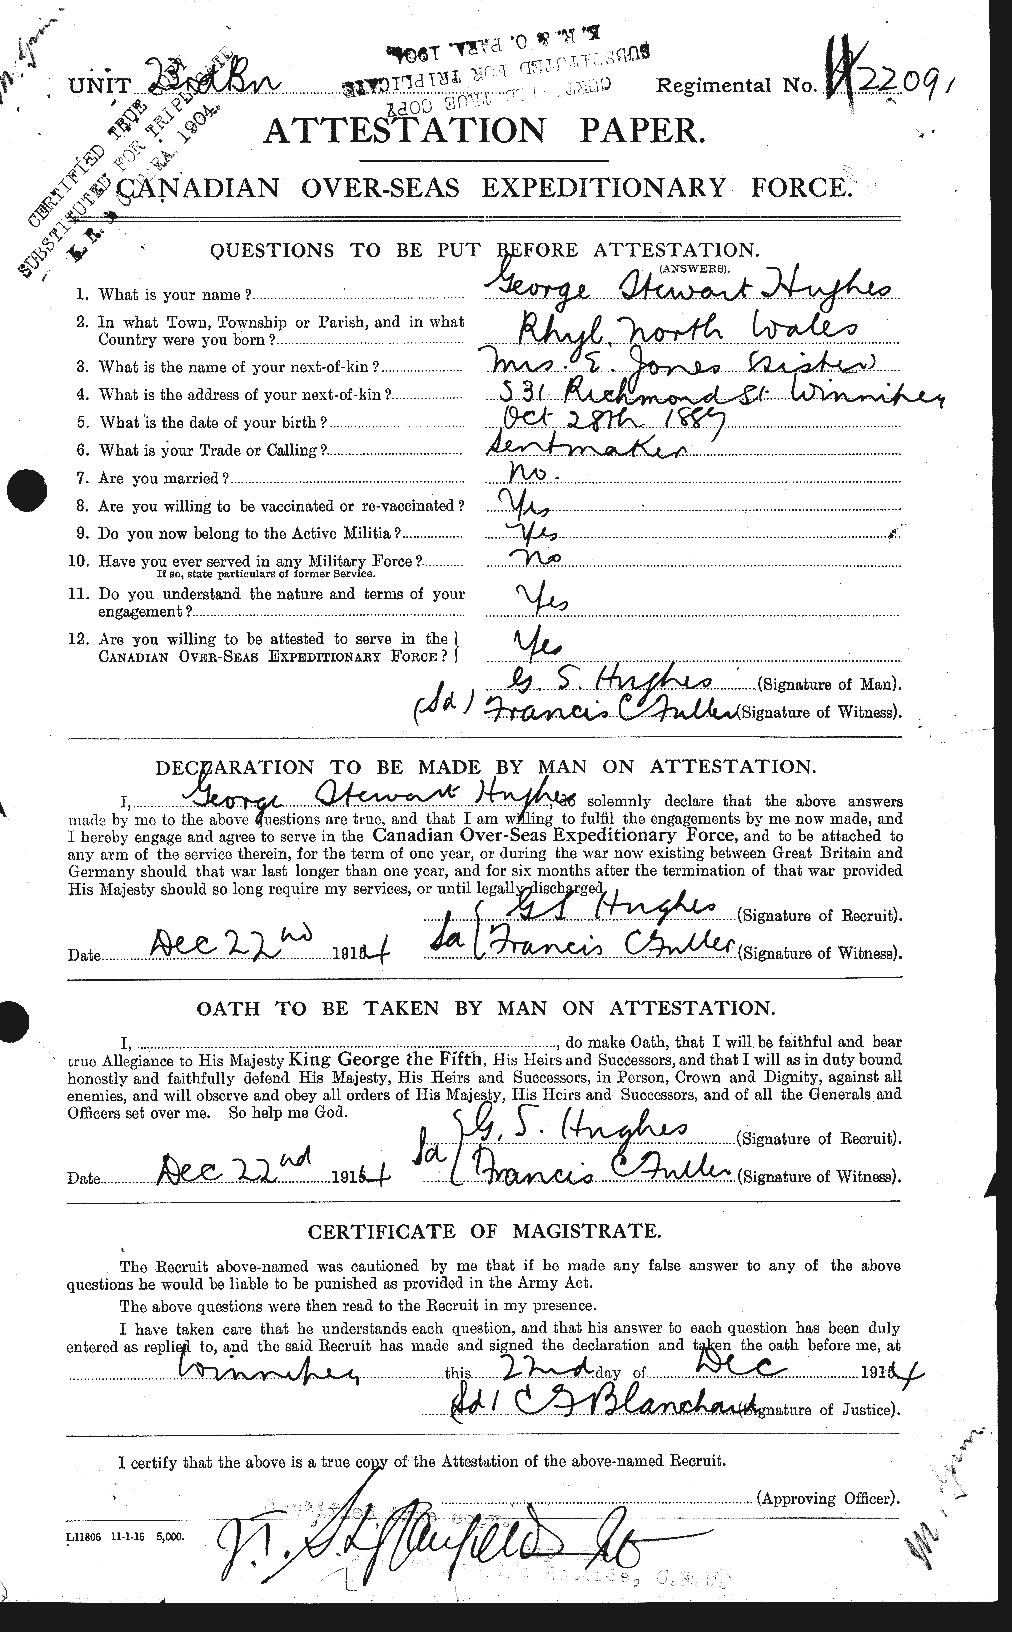 Personnel Records of the First World War - CEF 403836a